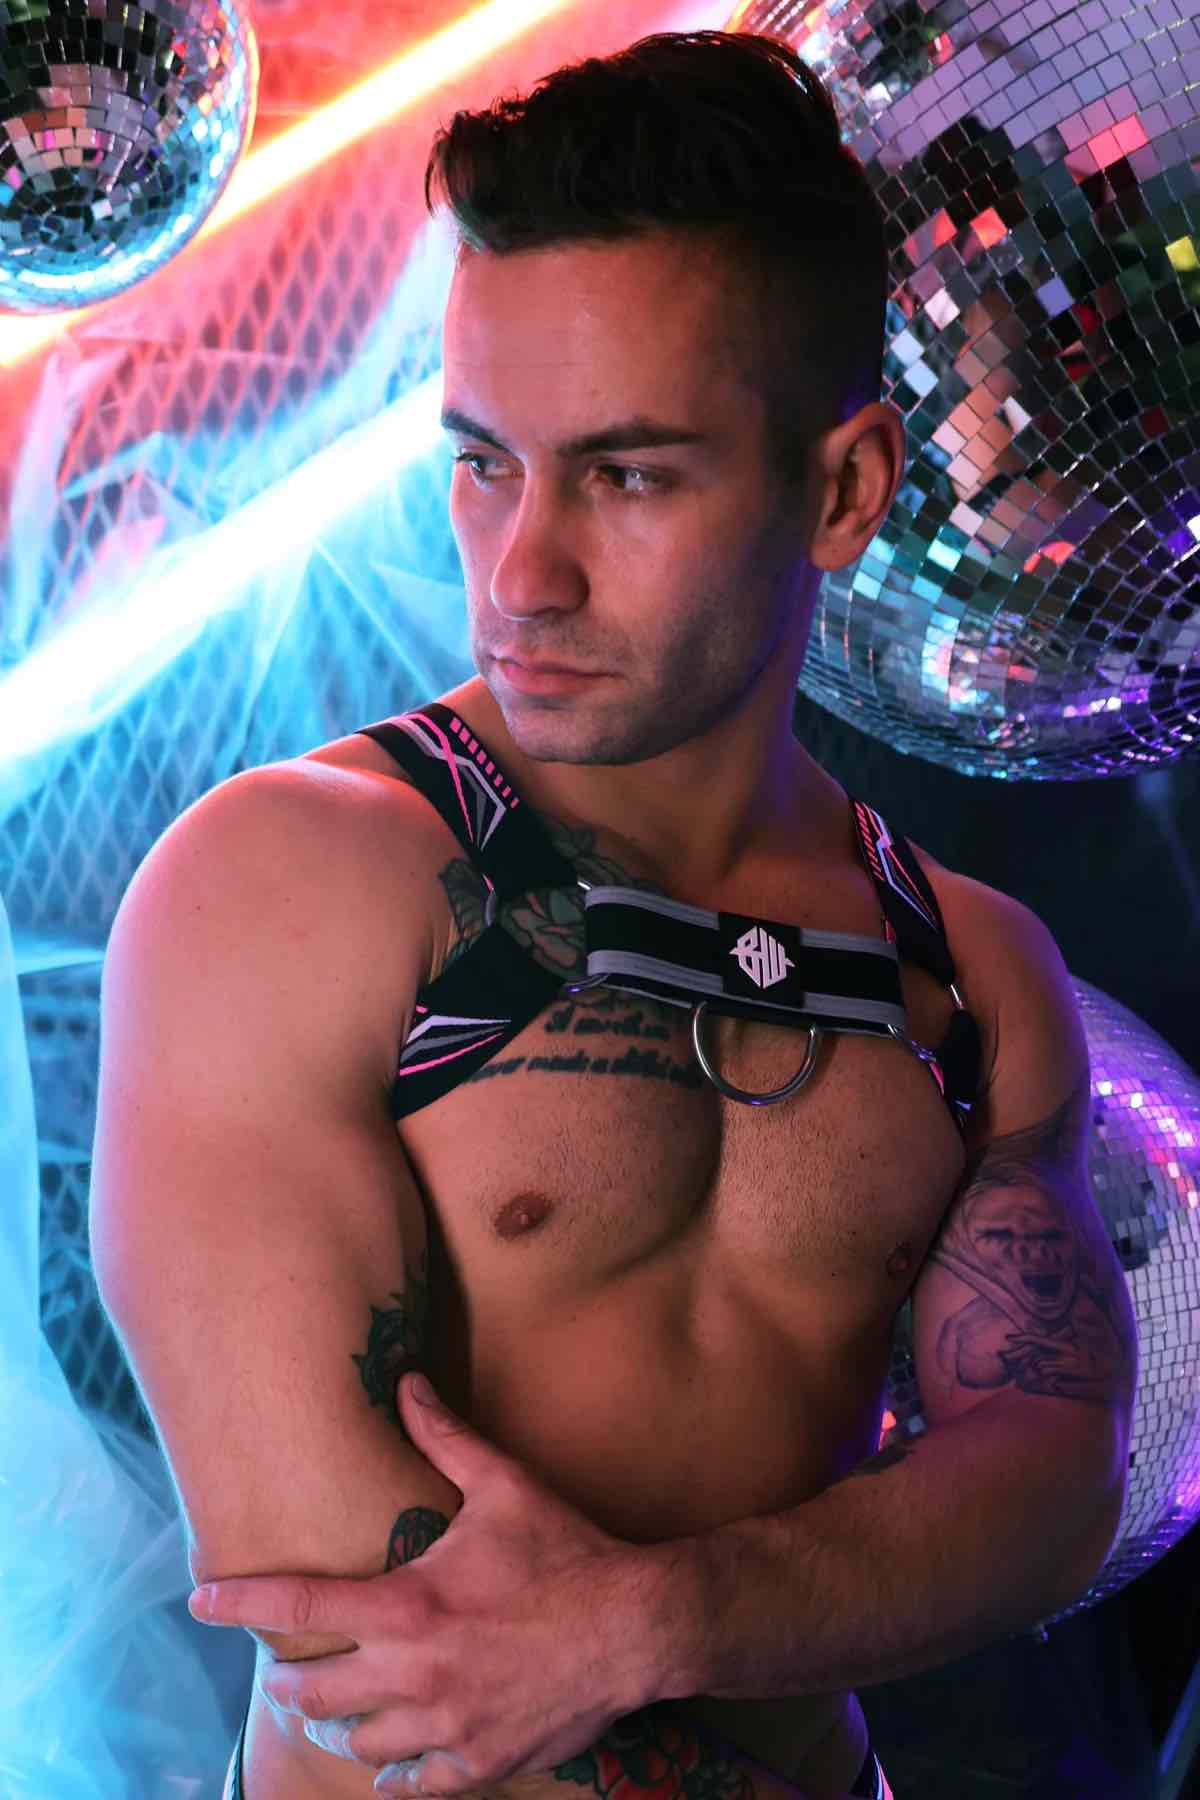 Model wearing the neon pink Cyber Nights Harness, front view.